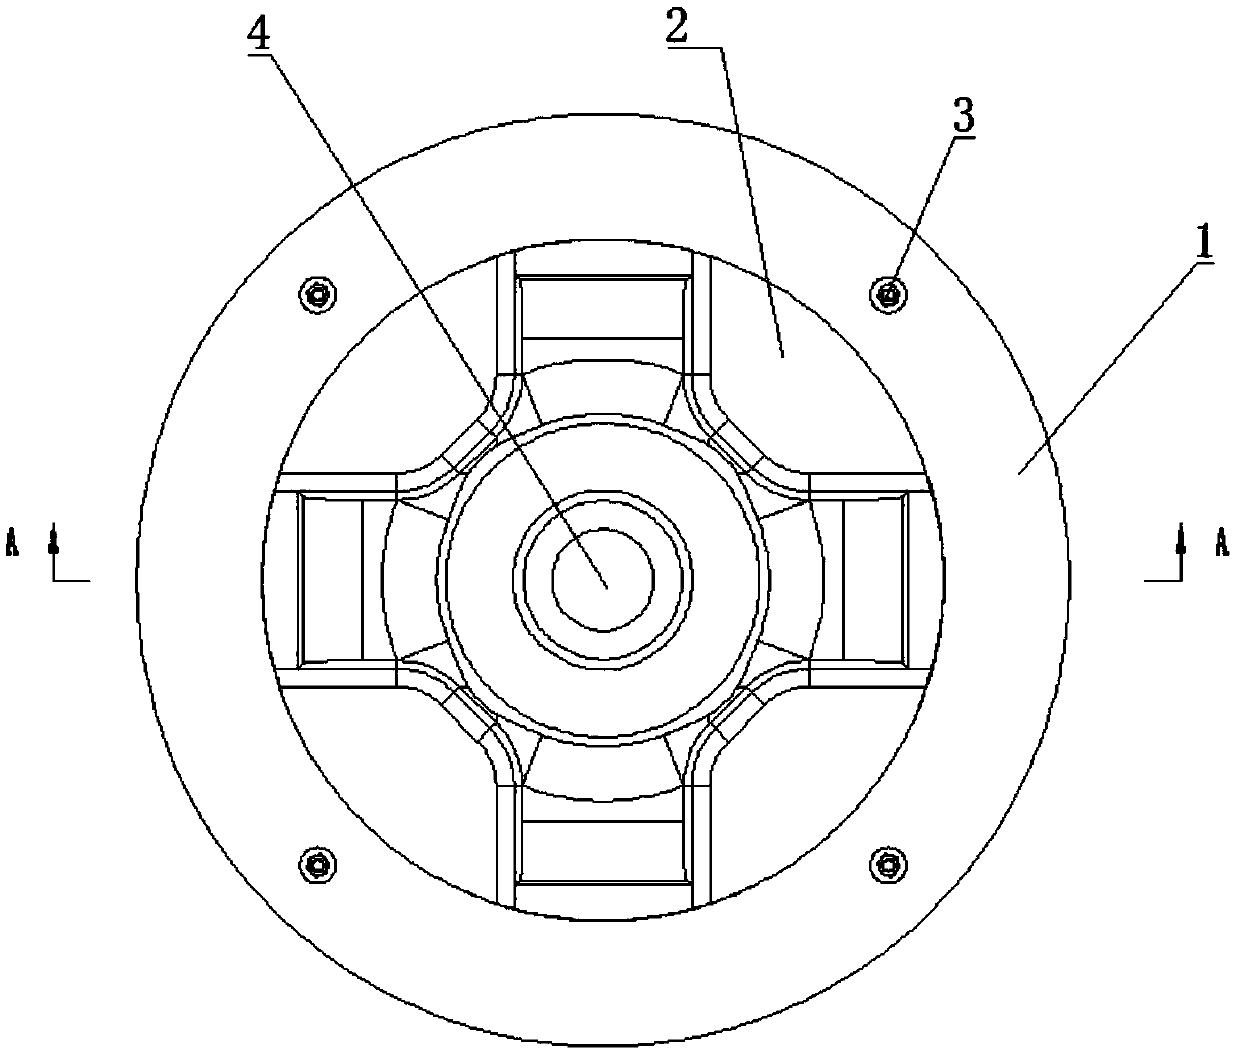 A combined mold for integral forging of hinged beams and a method for processing hinged beams